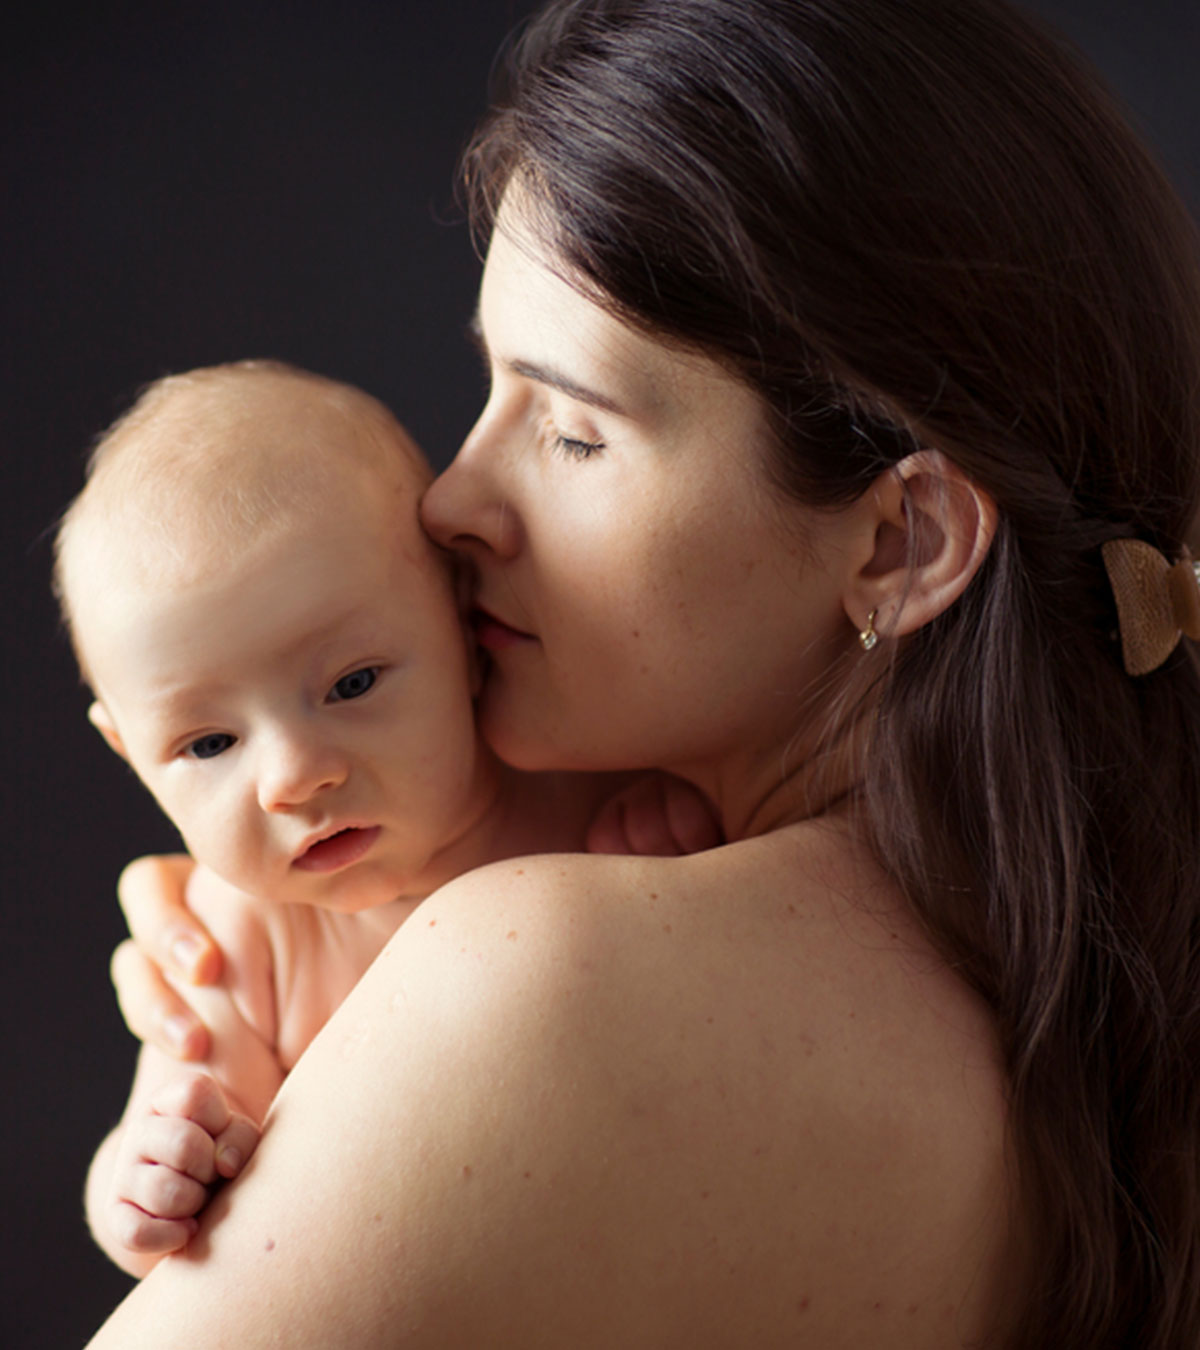 Dear World: It's Not Just About The New Baby After Mom Gives Birth – She Matters Too